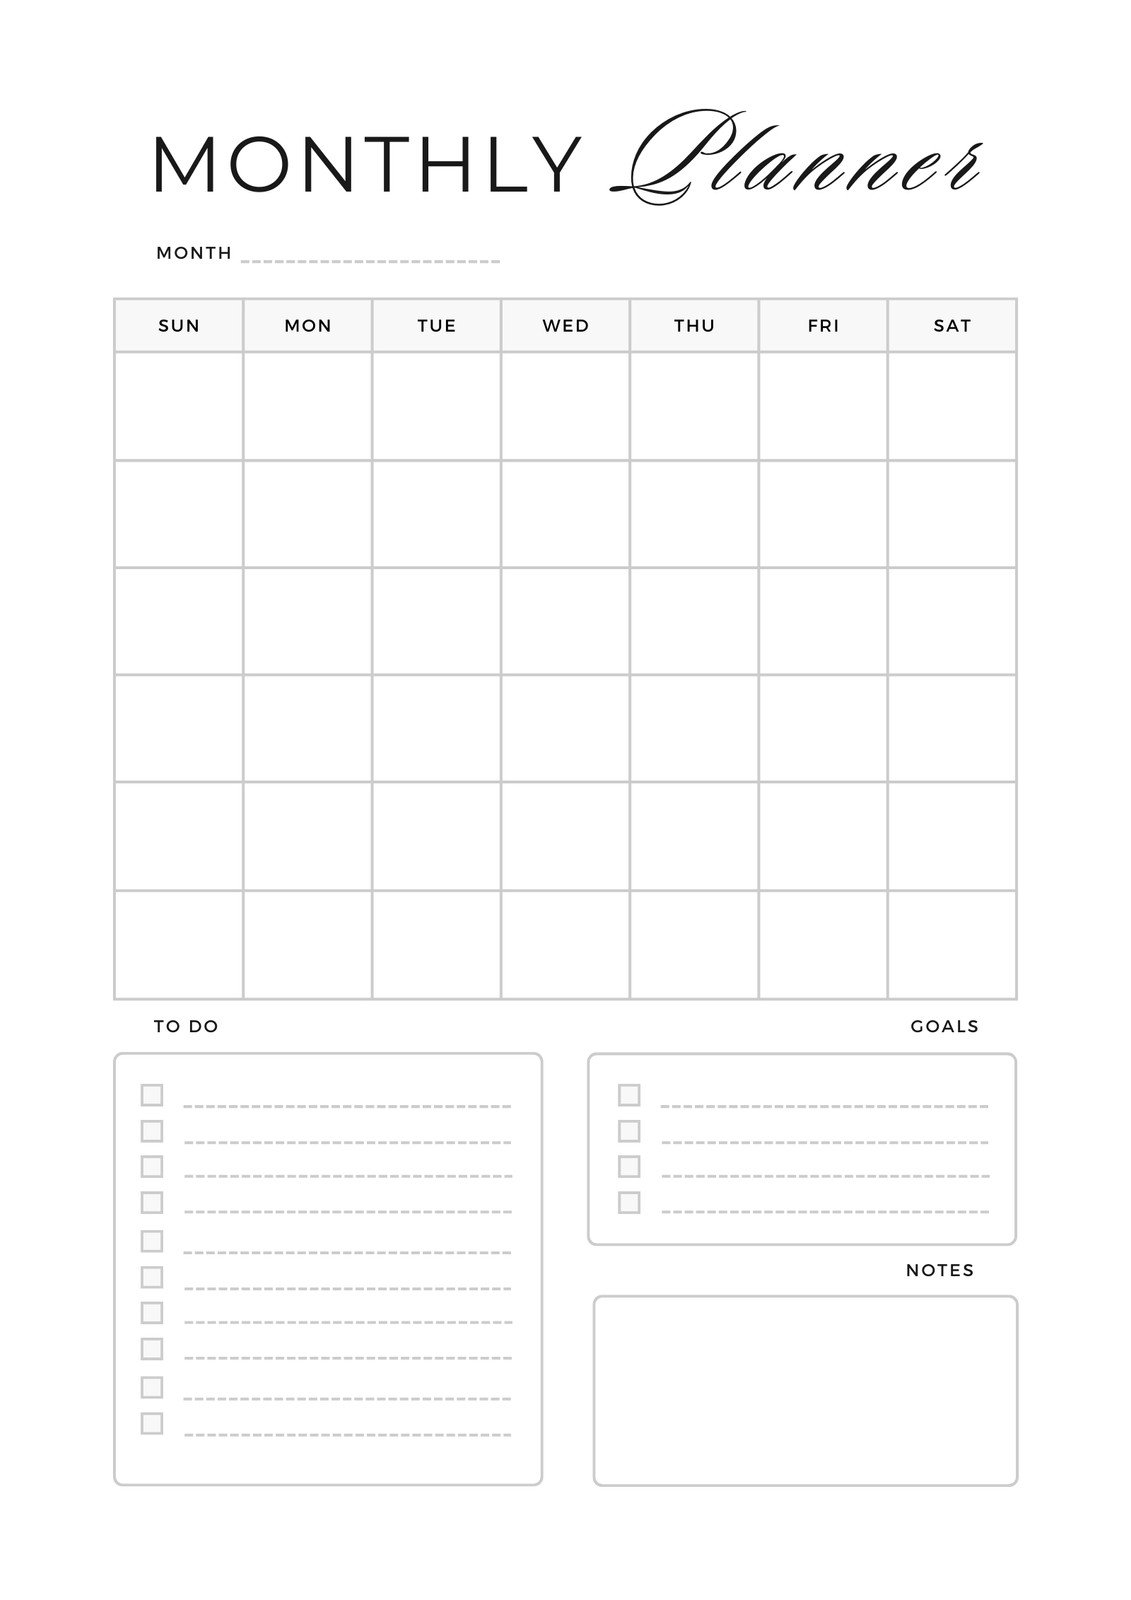 Free personalized monthly planner templates to print